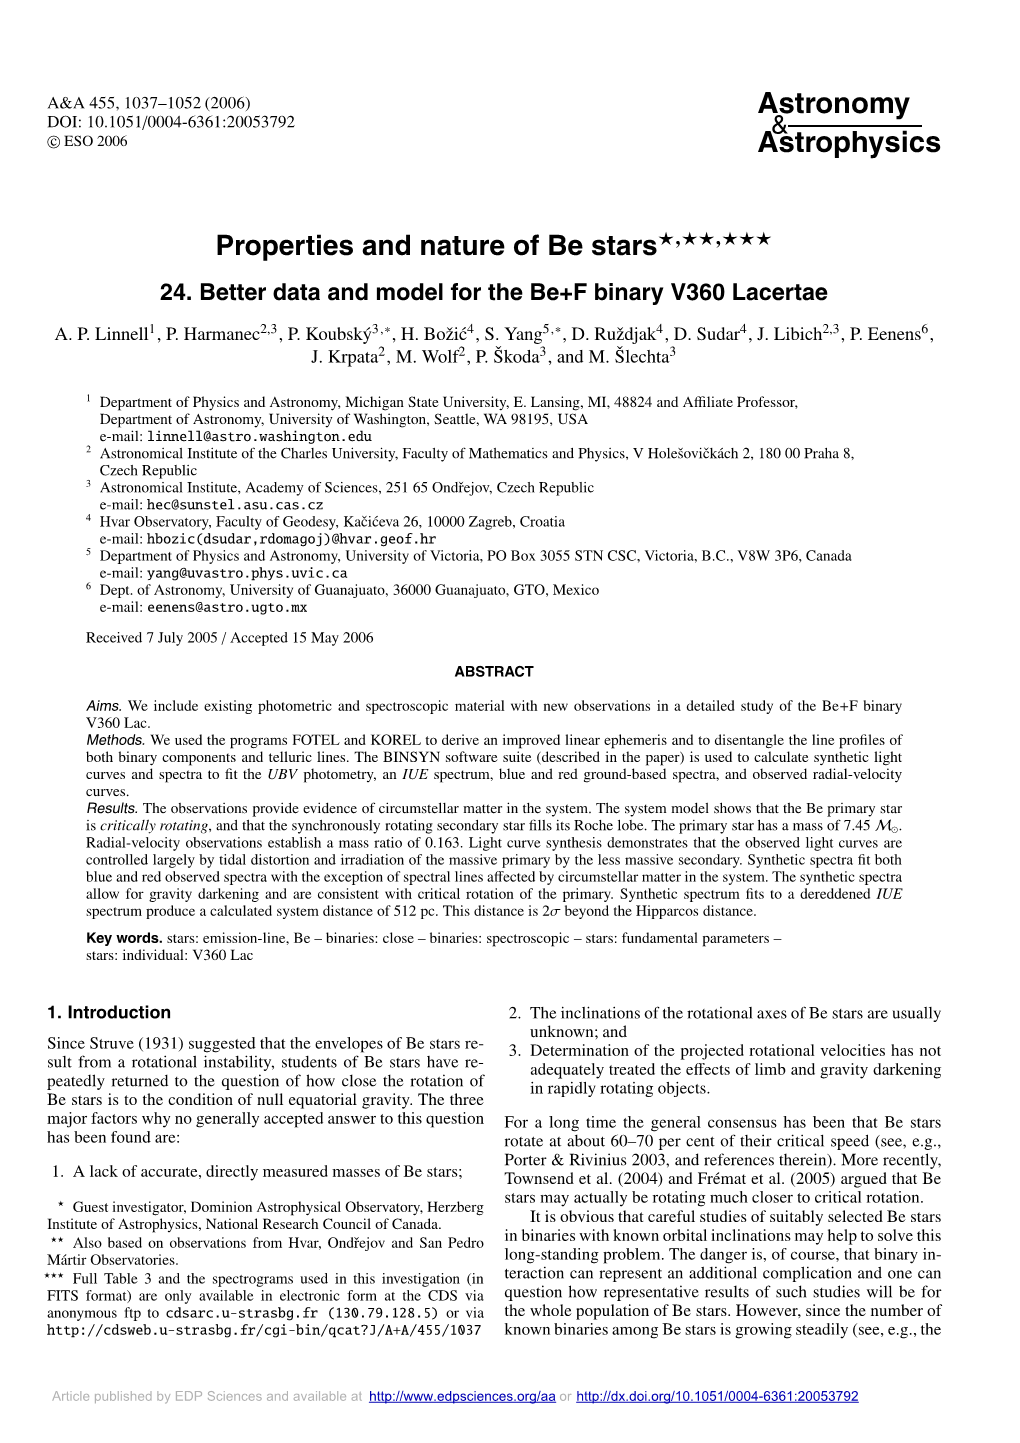 Properties and Nature of Be Stars�,��,��� 24